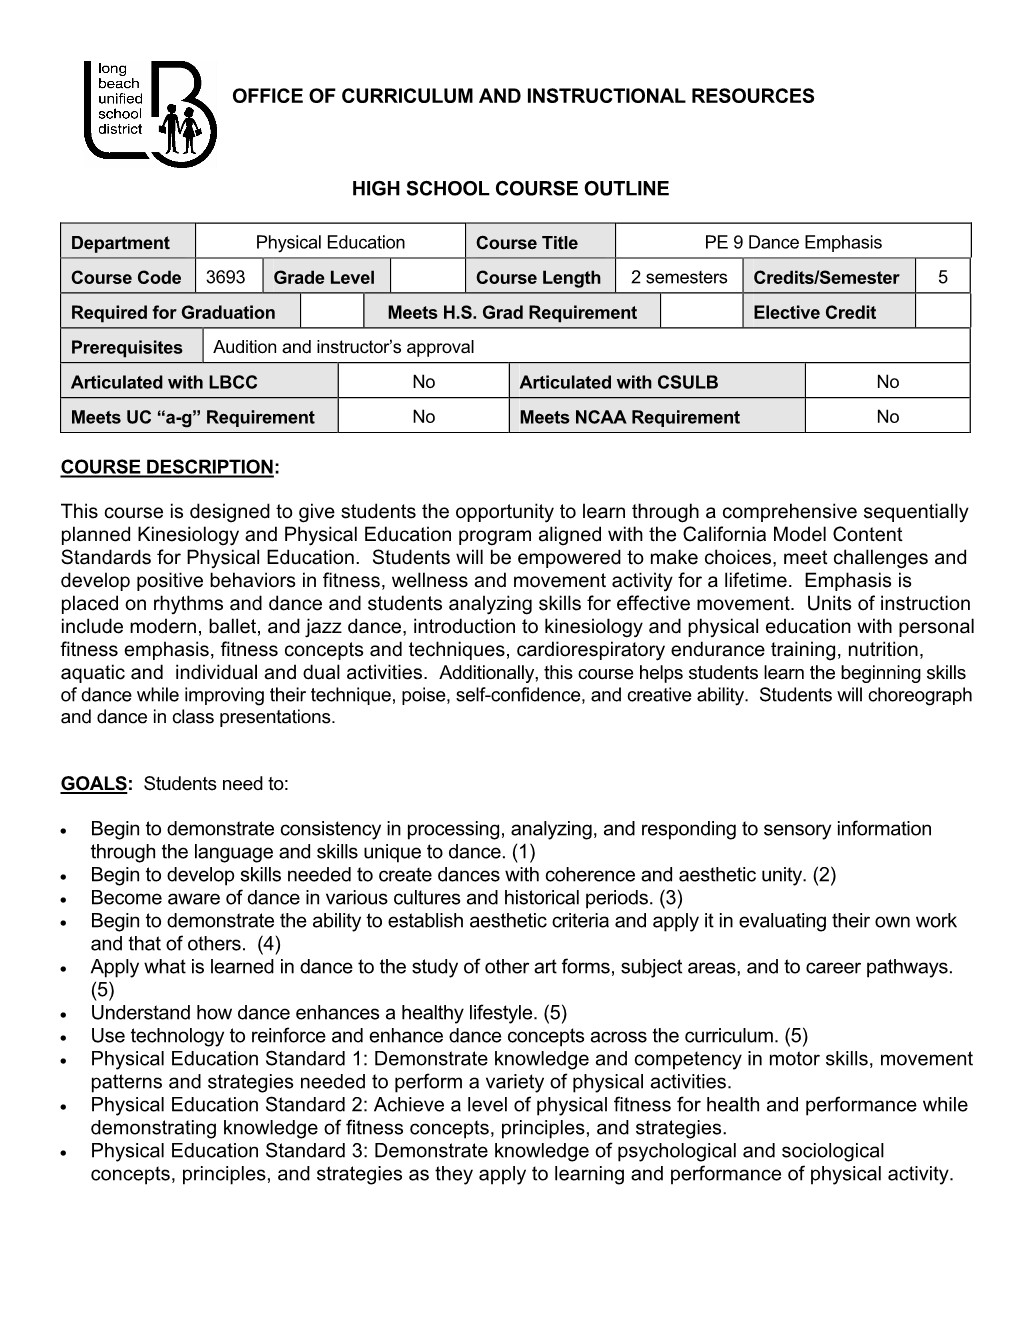 Office of Curriculum and Instructional Resources High School Course Outline